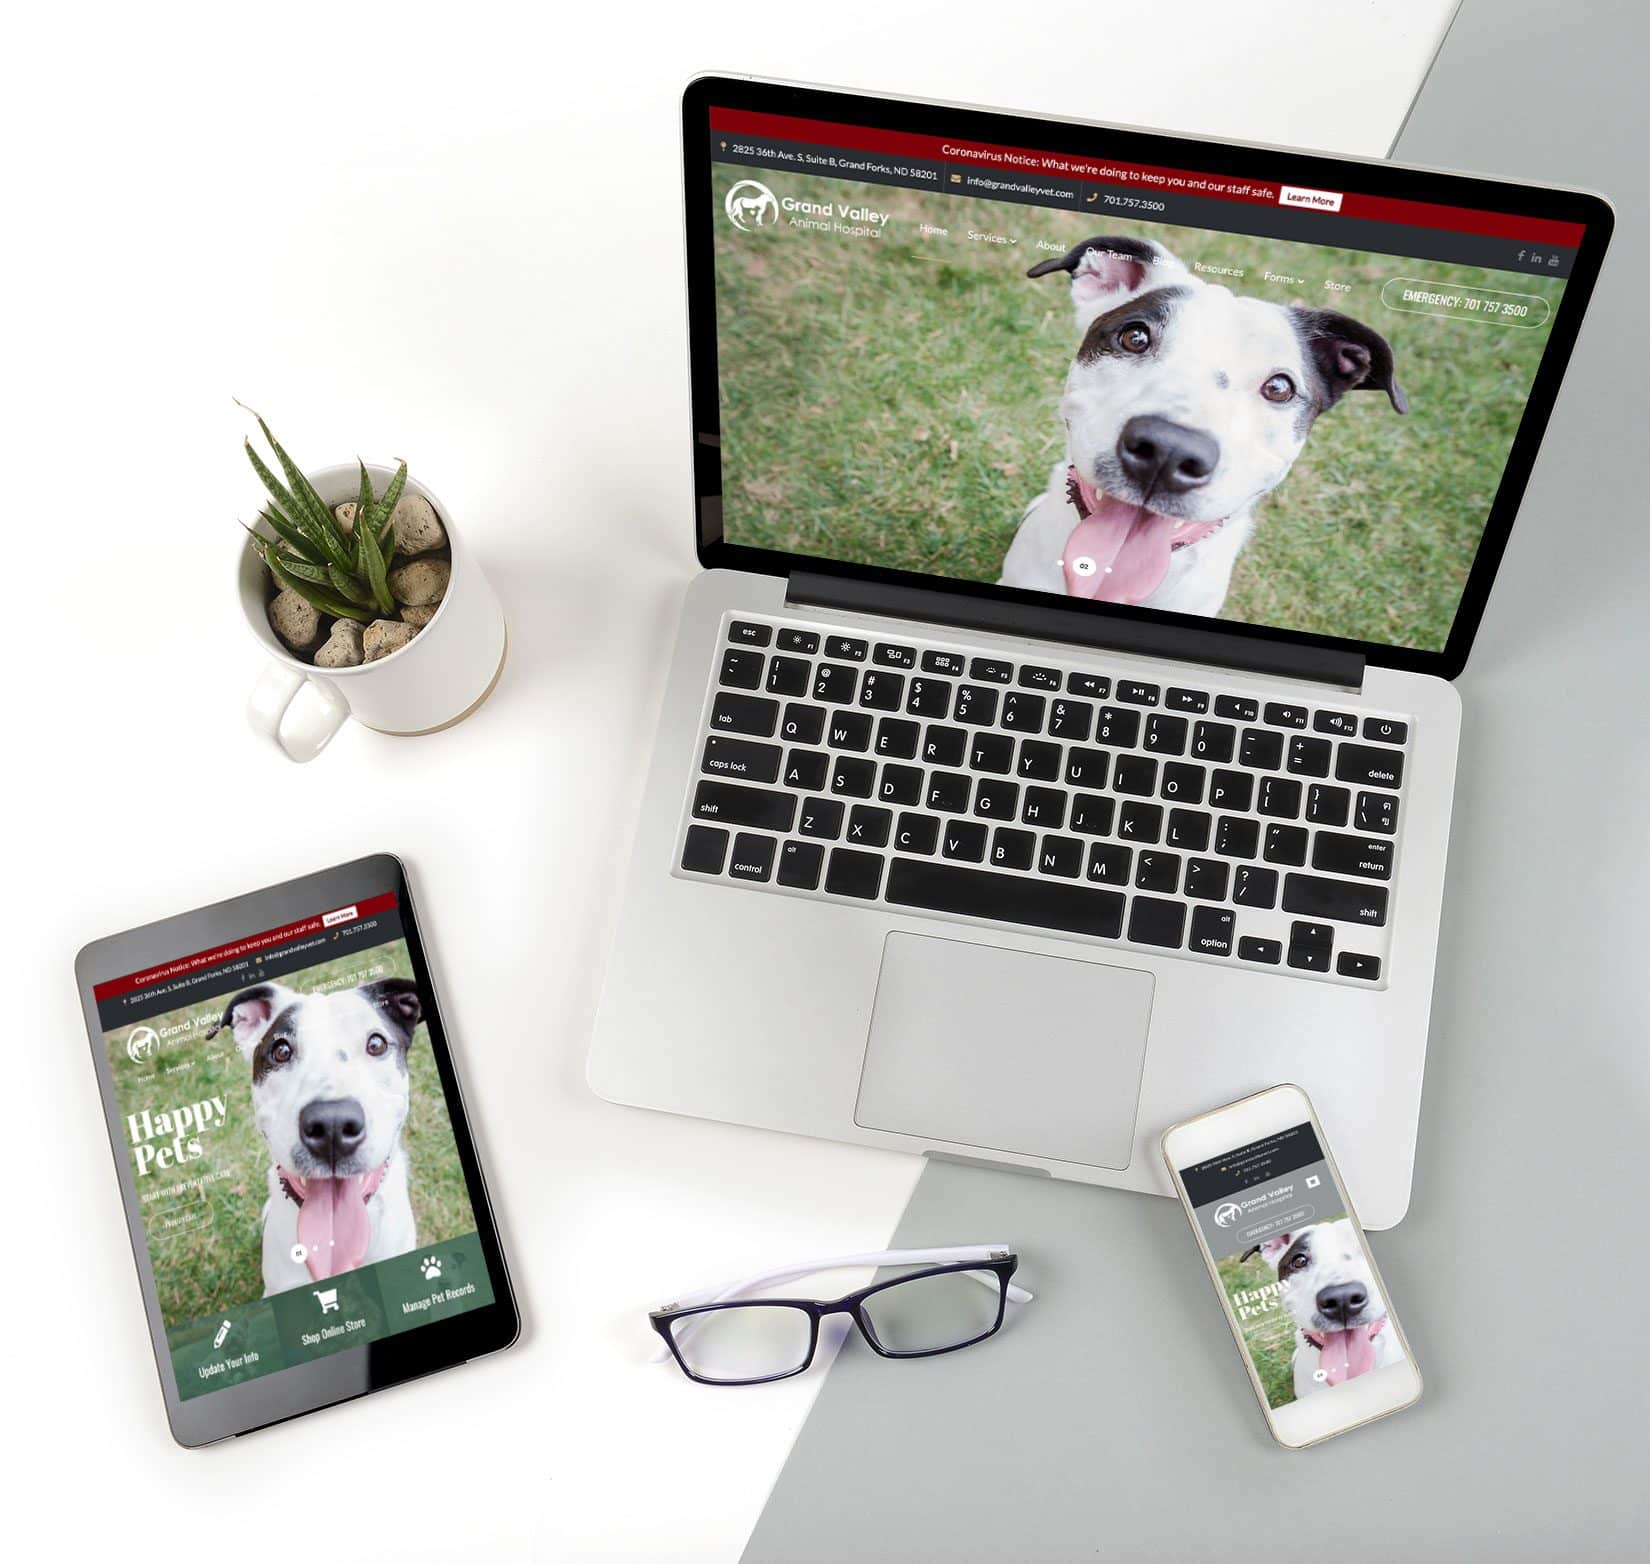 A website designed for Grand Valley Animal Hospital shown on the screens of a laptop, tablet, and mobile phone.